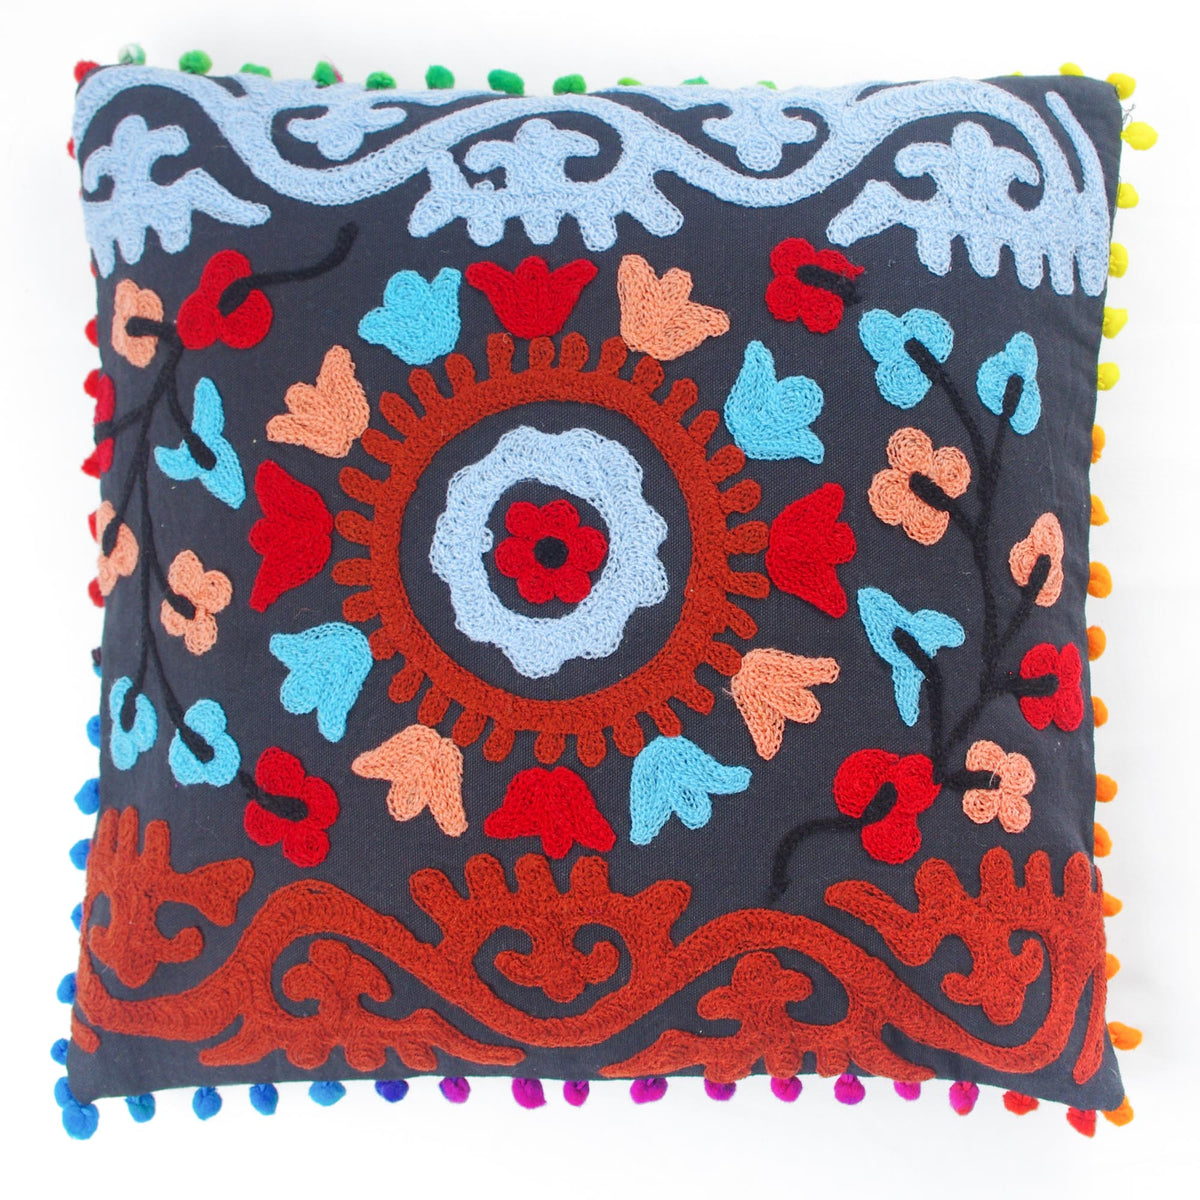 Suzani Woolen Embroidered Cotton Square Cushion Cover With Pom Pom - Black & Red